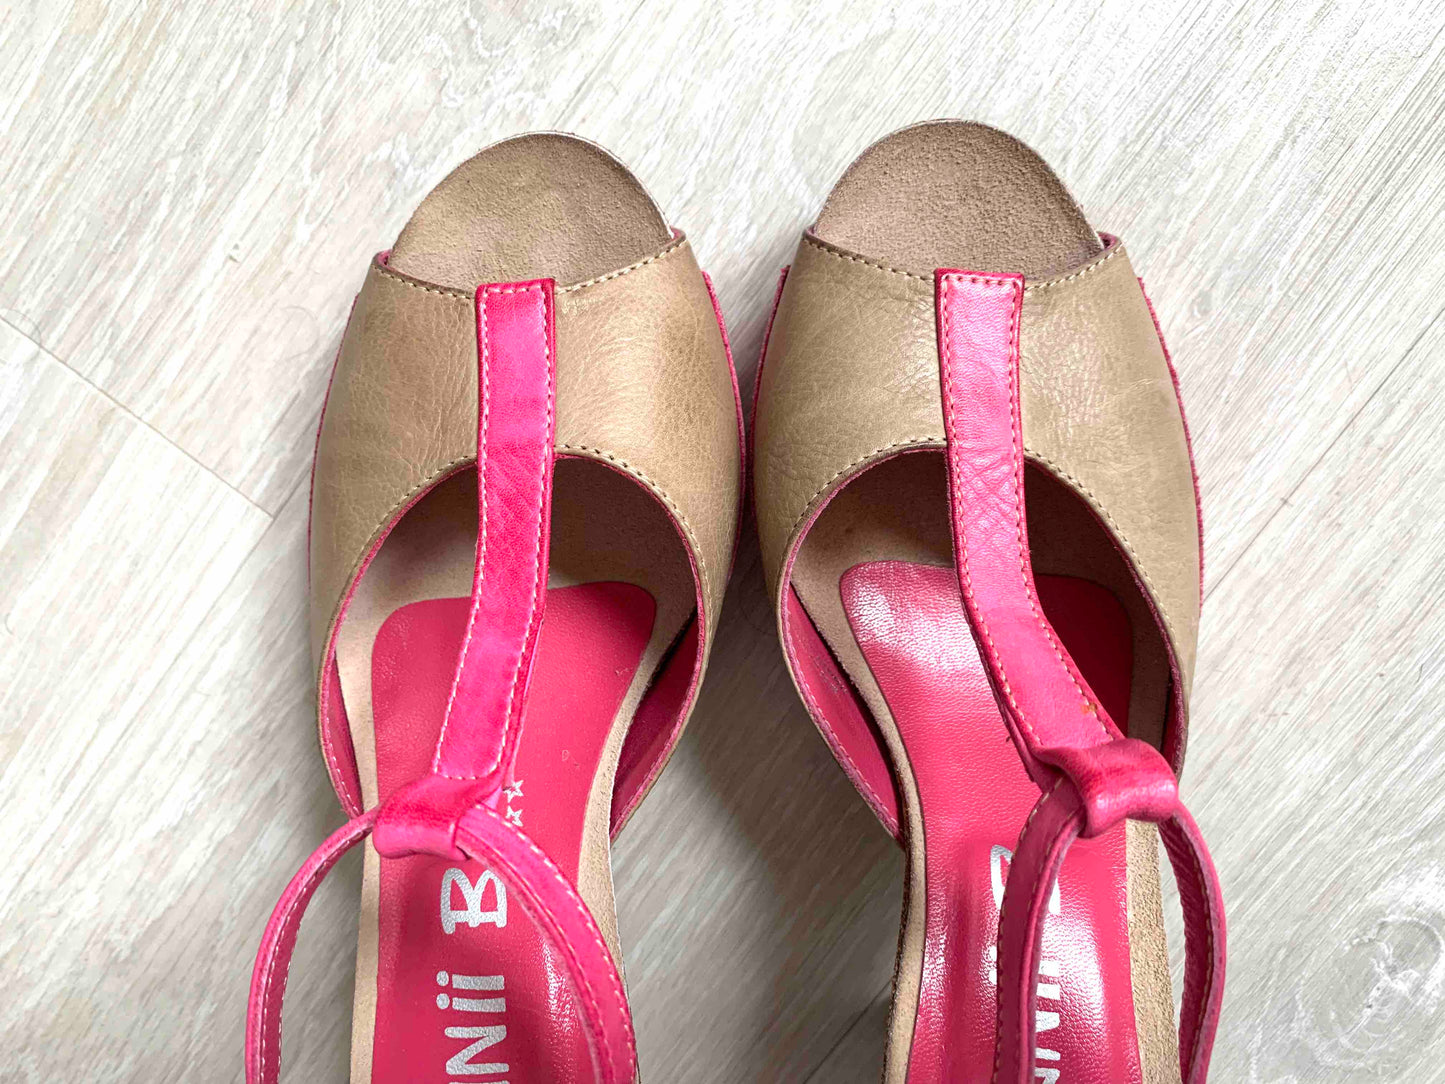 Soliel Natural/Pink- Last pairs 35 and 37